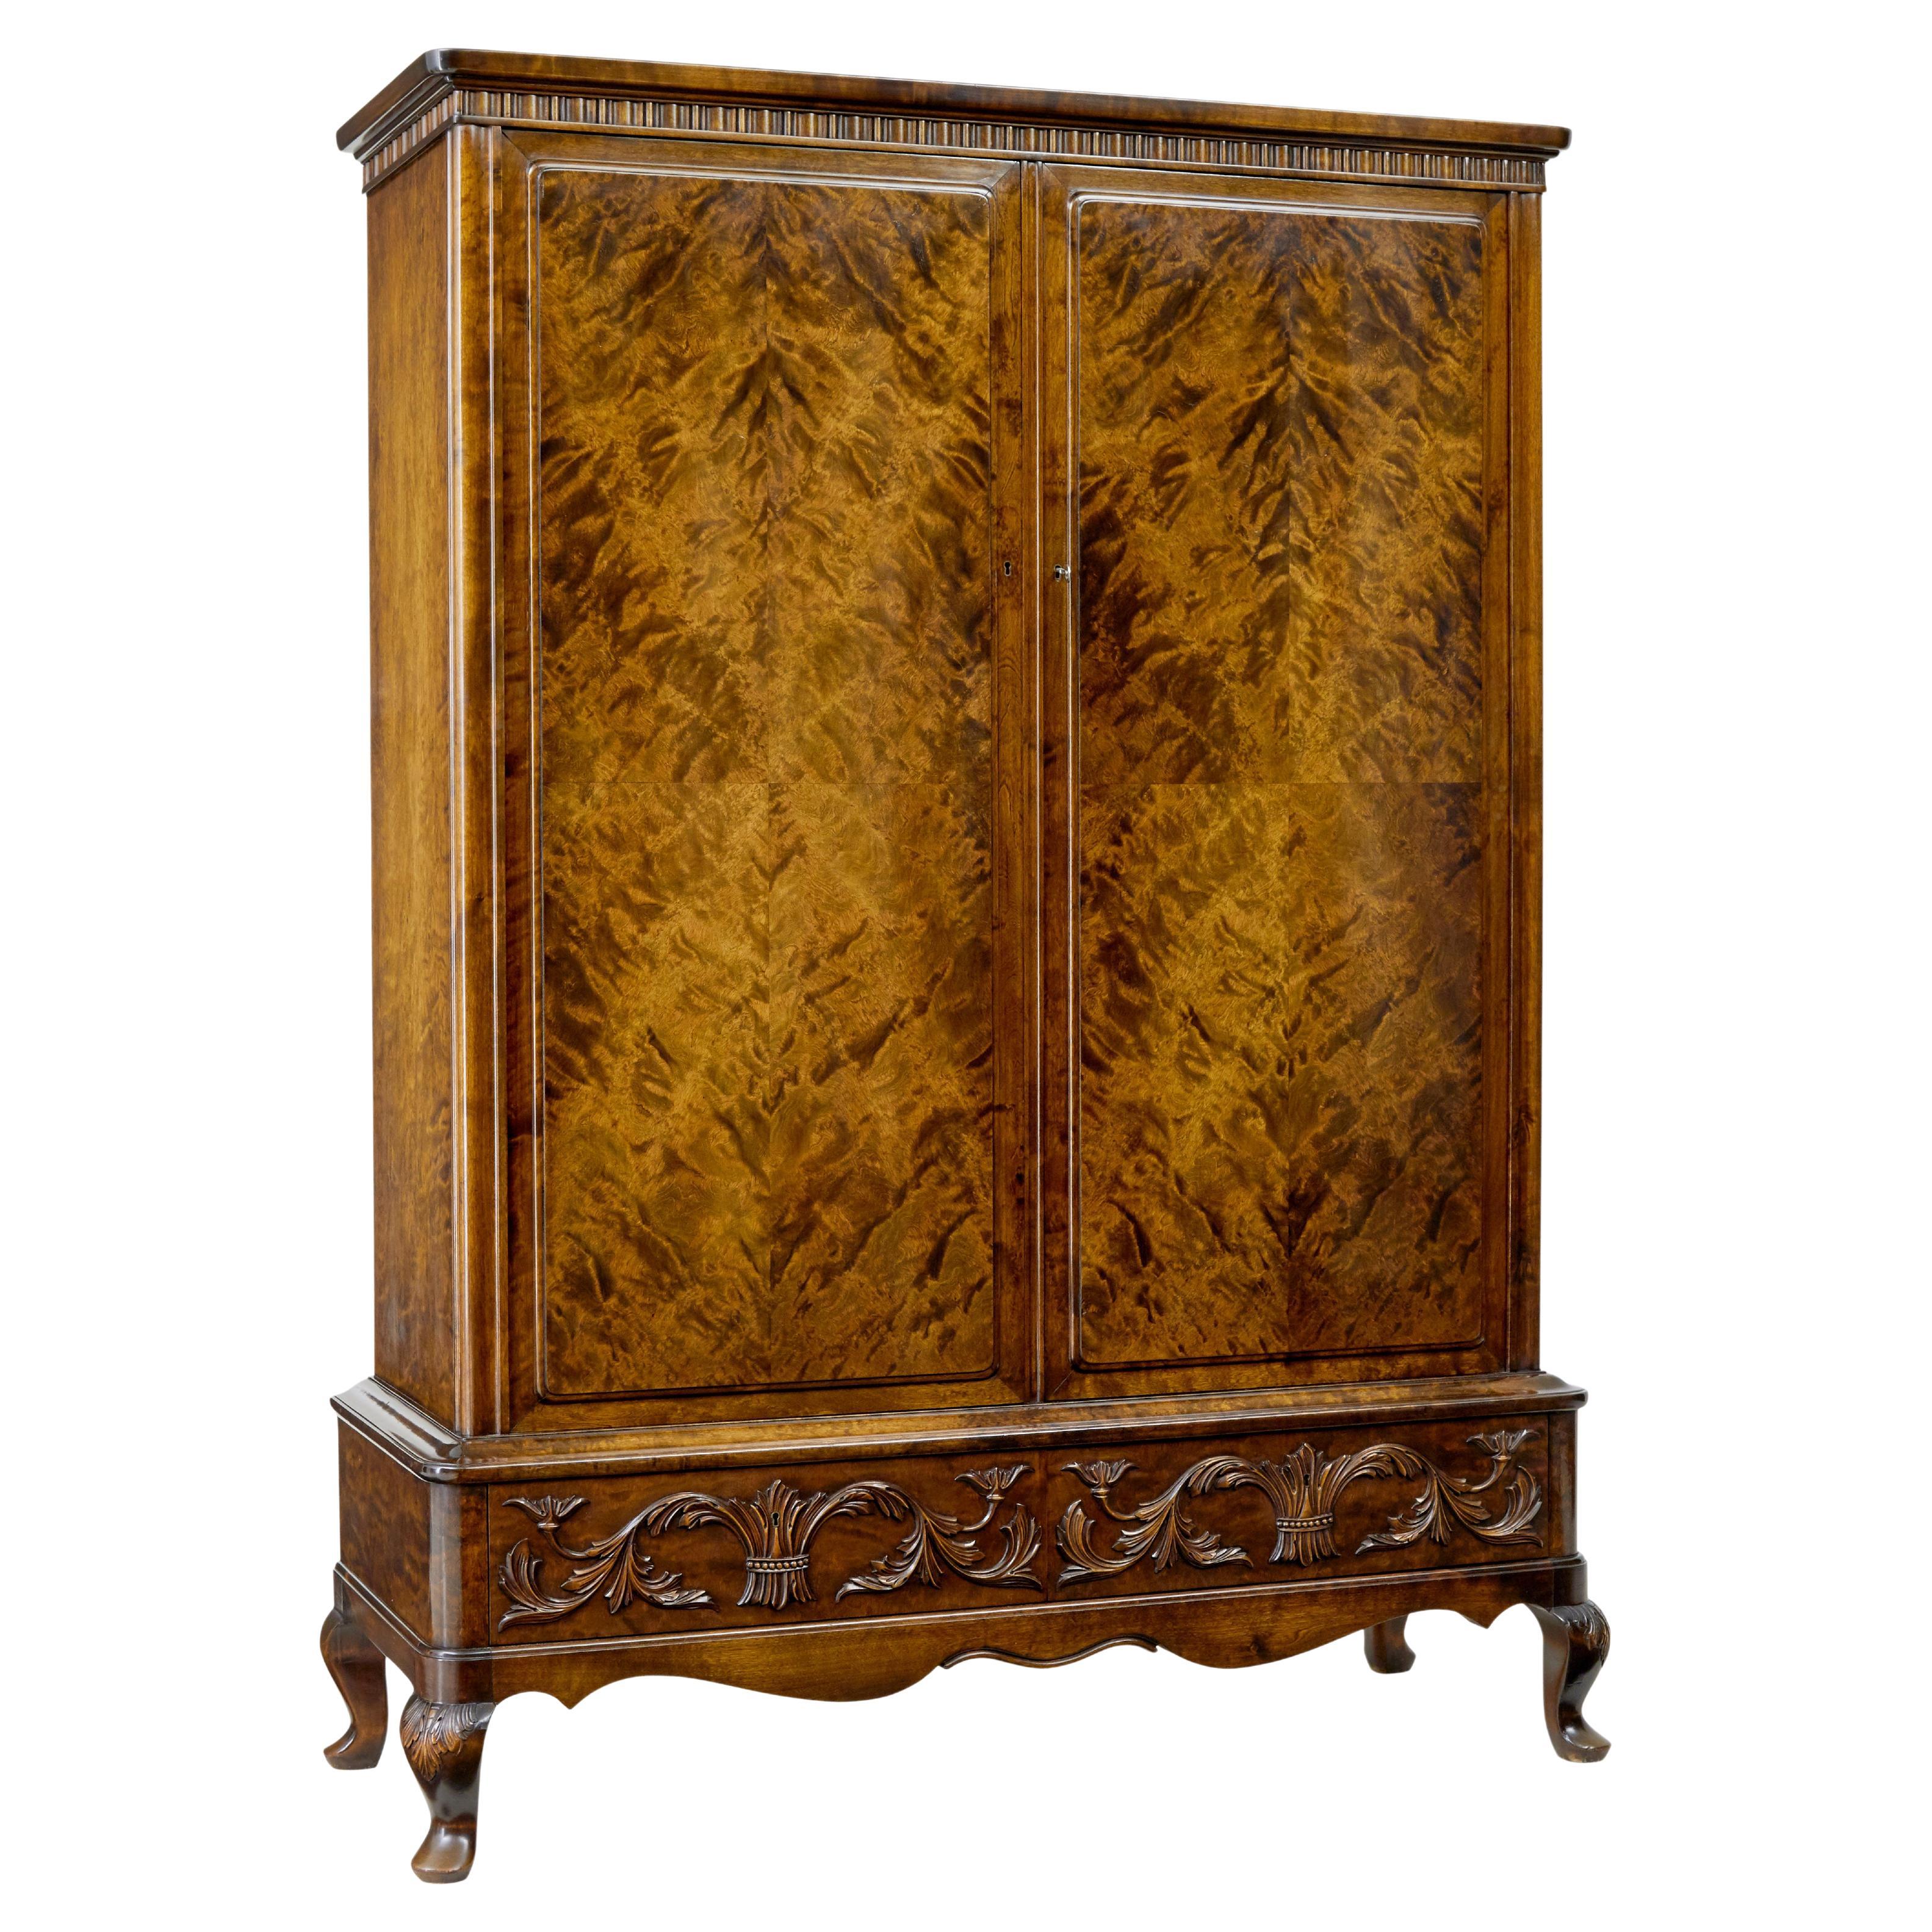 Mid 20th century burr birch cabinet by Bodafors For Sale